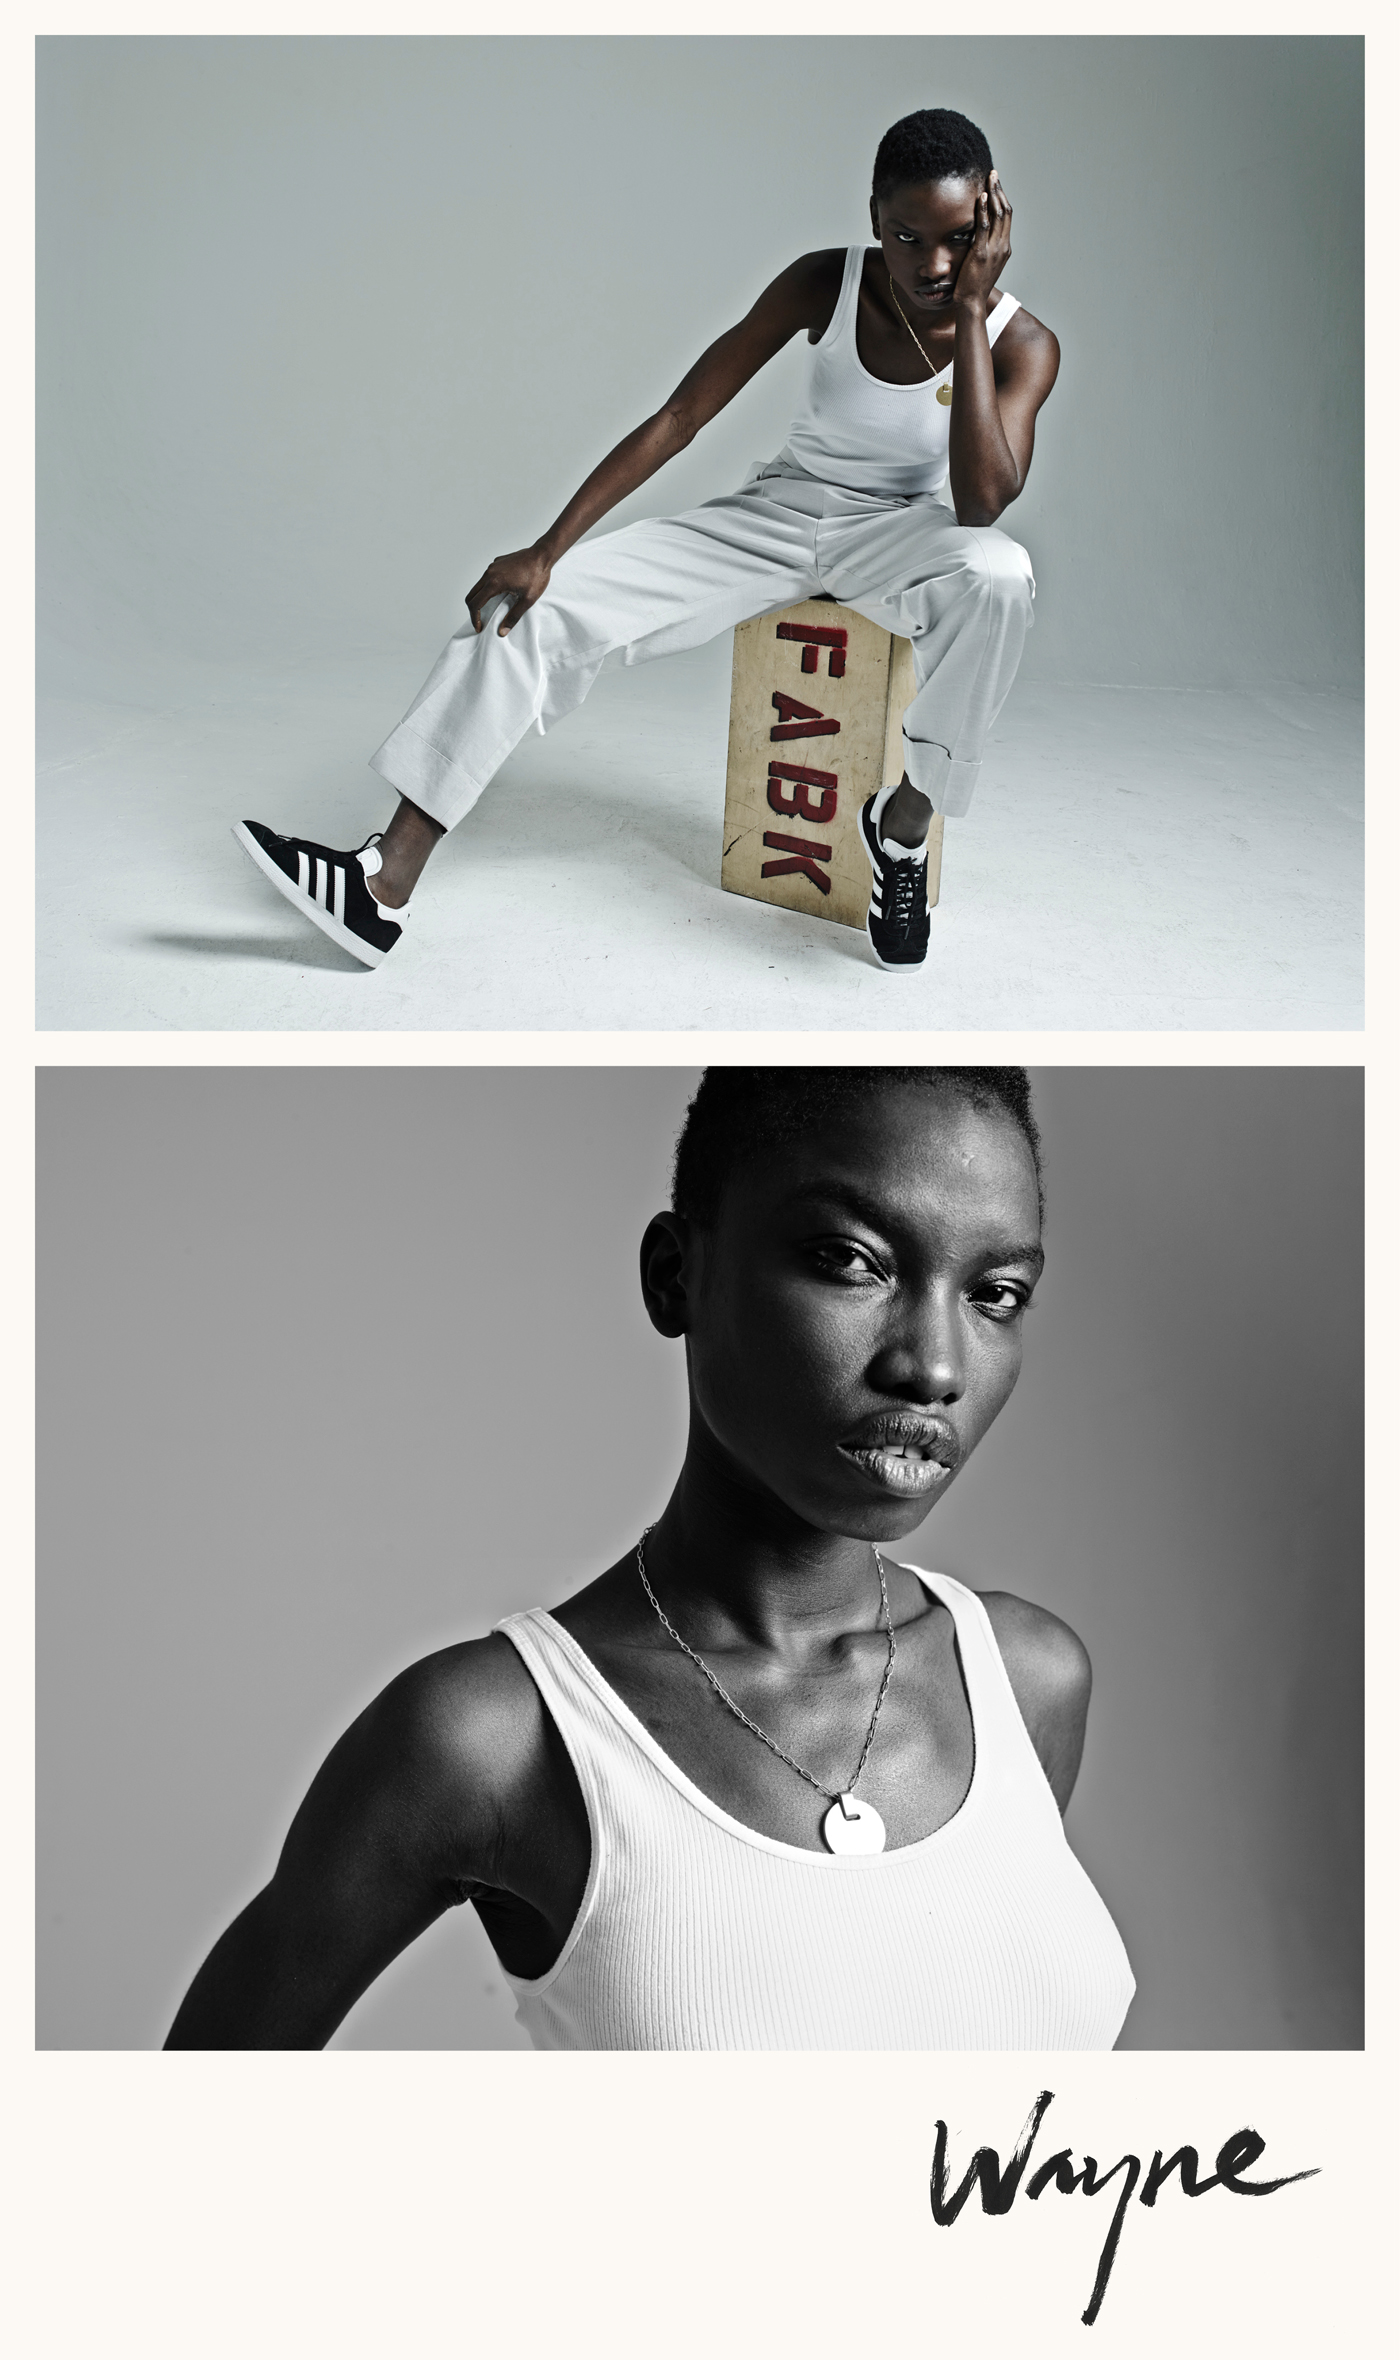 Wayne Booth at Heroes Model Management wears tank top, stylist's own. Trousers by The Row. Sneakers and necklace, model's own.